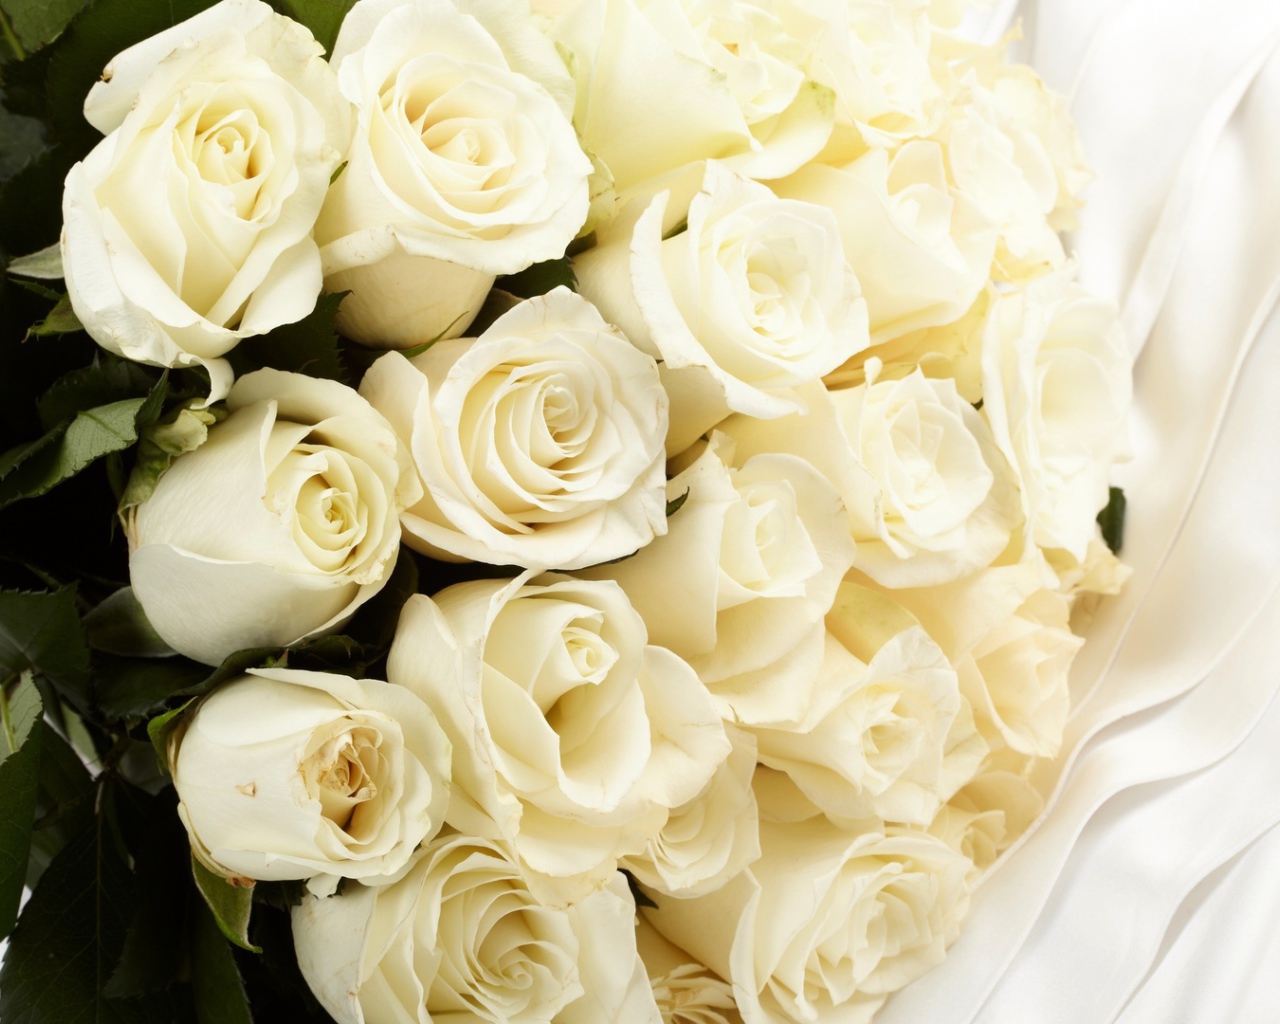 White roses in a bouquet for the bride